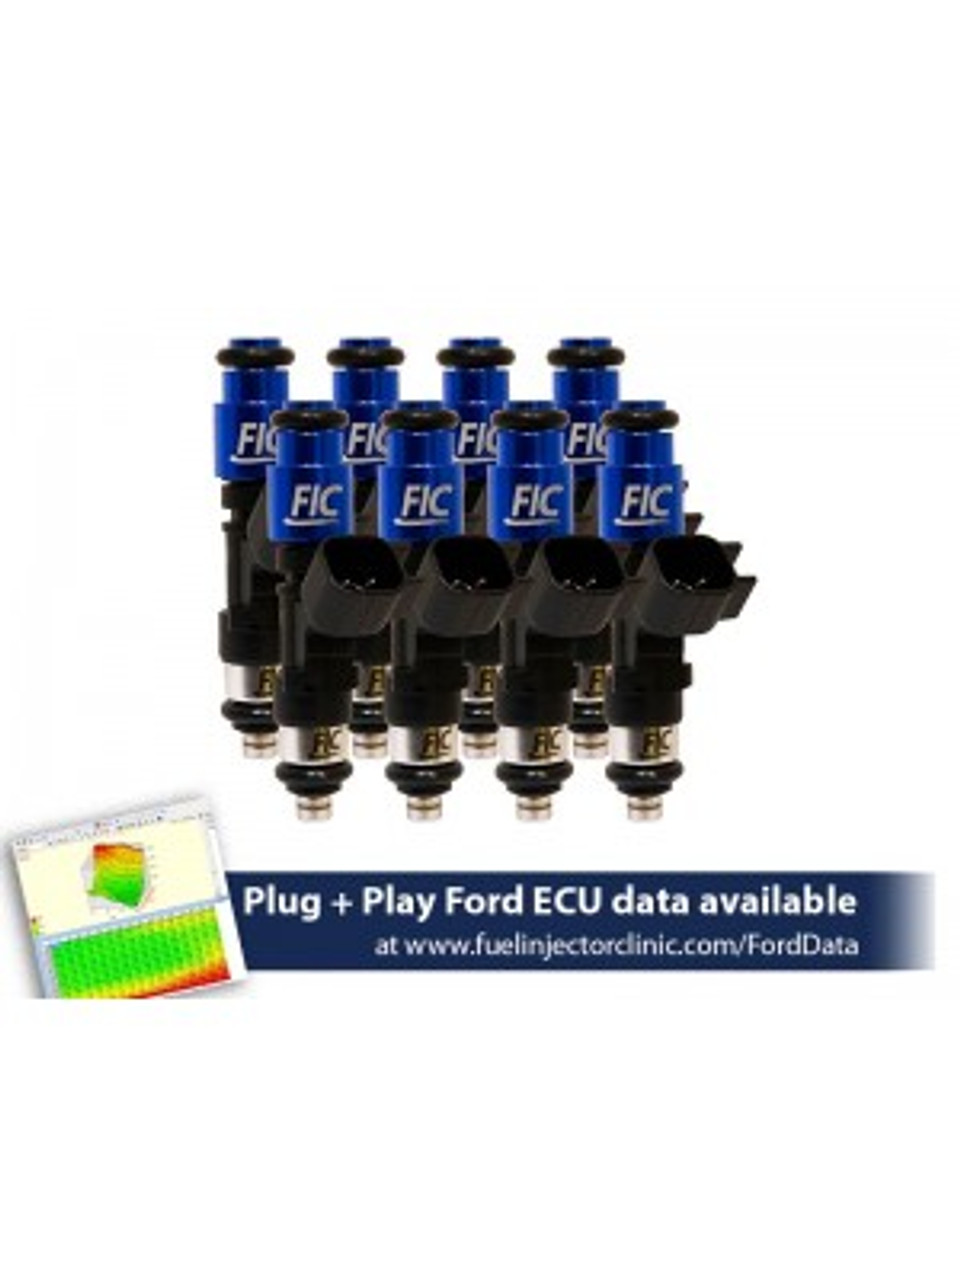 445CC (42 LBS/HR AT 43.5 PSI FUEL PRESSURE) FIC FUEL INJECTOR CLINIC INJECTOR SET FOR MUSTANG GT (2005+)/GT350 (2015-2016)/ BOSS 302 (2012-2013)/COBRA (1999-2004) (HIGH-Z)